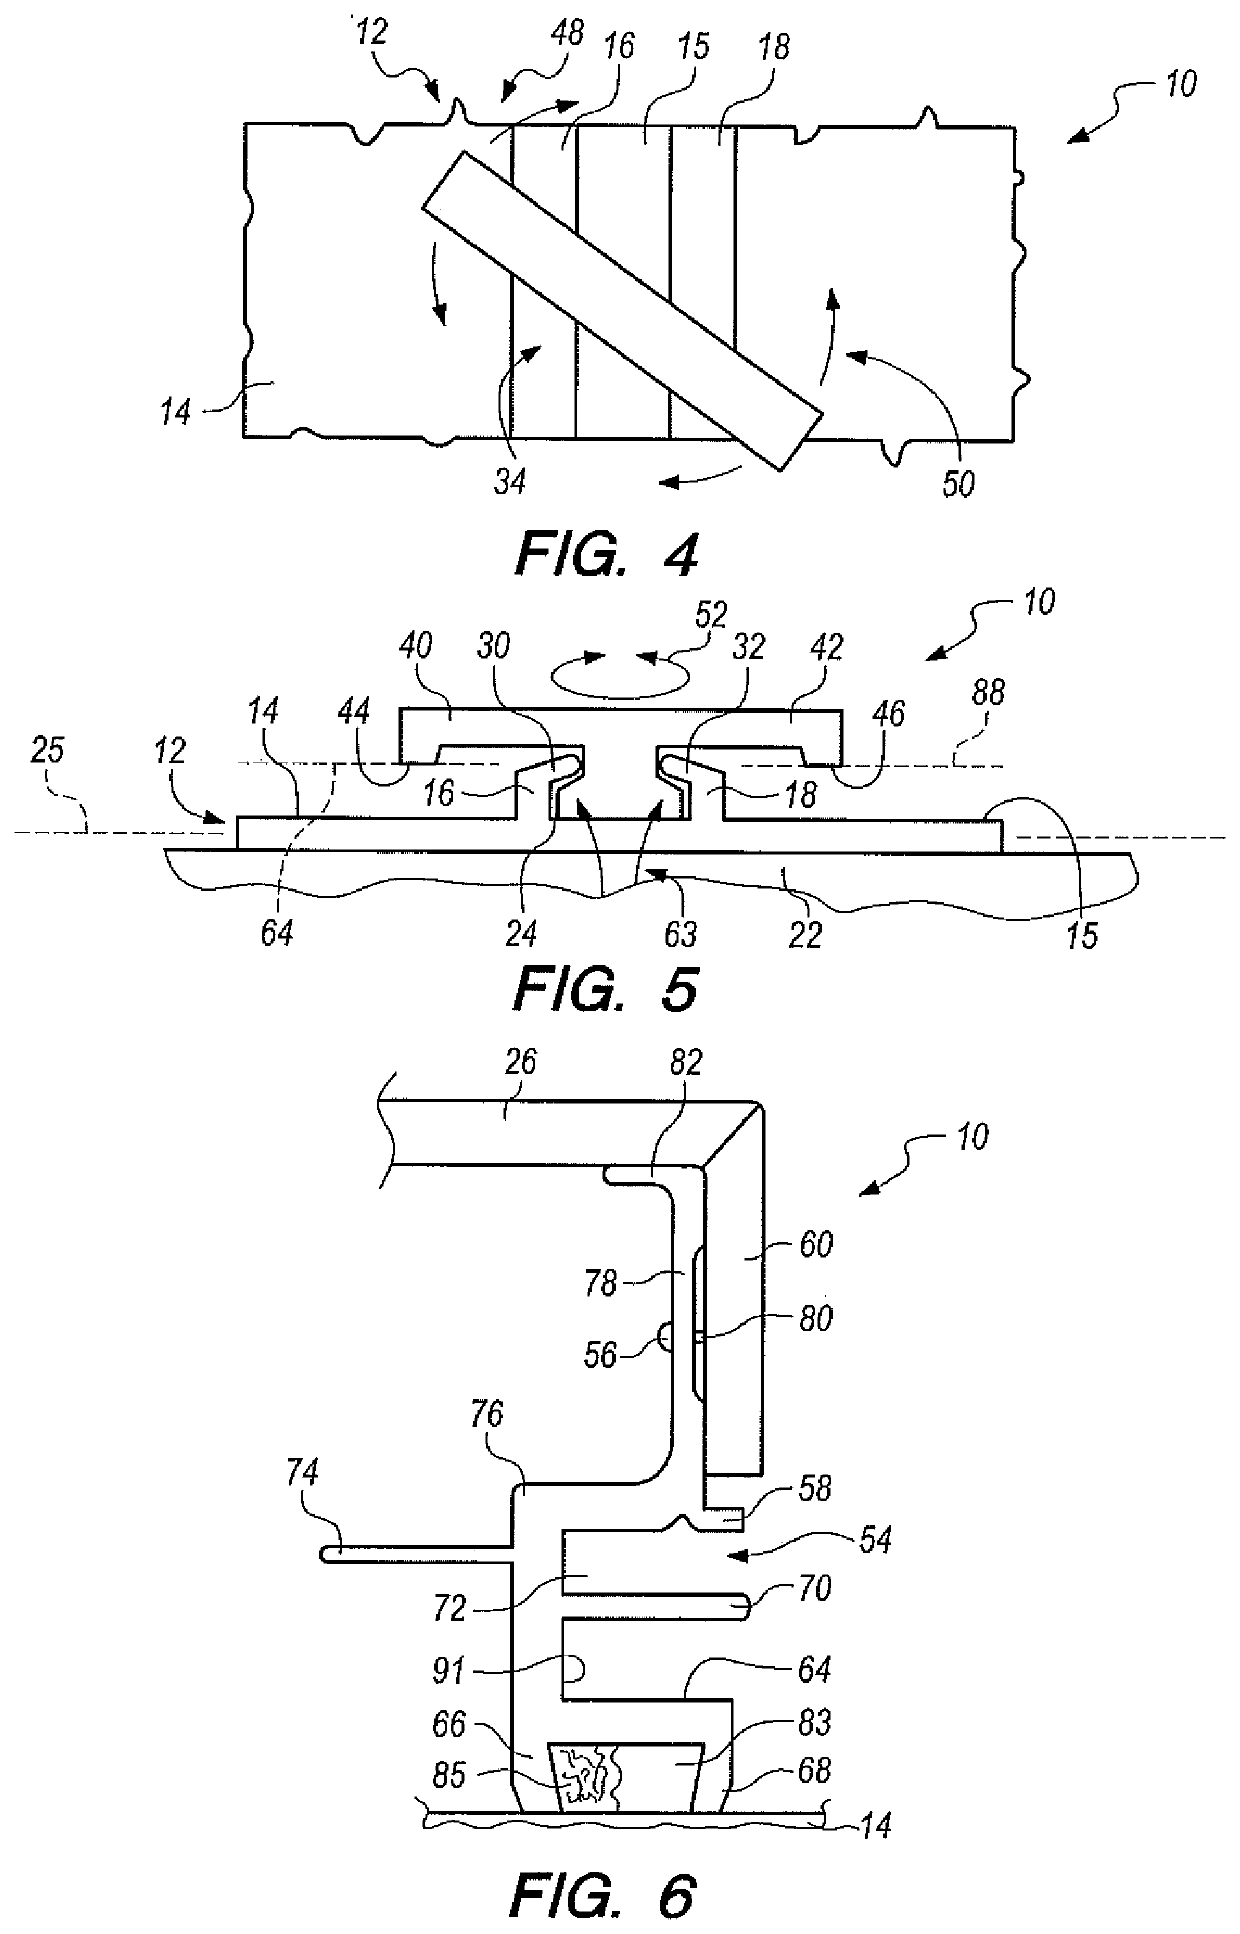 Apparatus for attaching an insulated panel to a facade